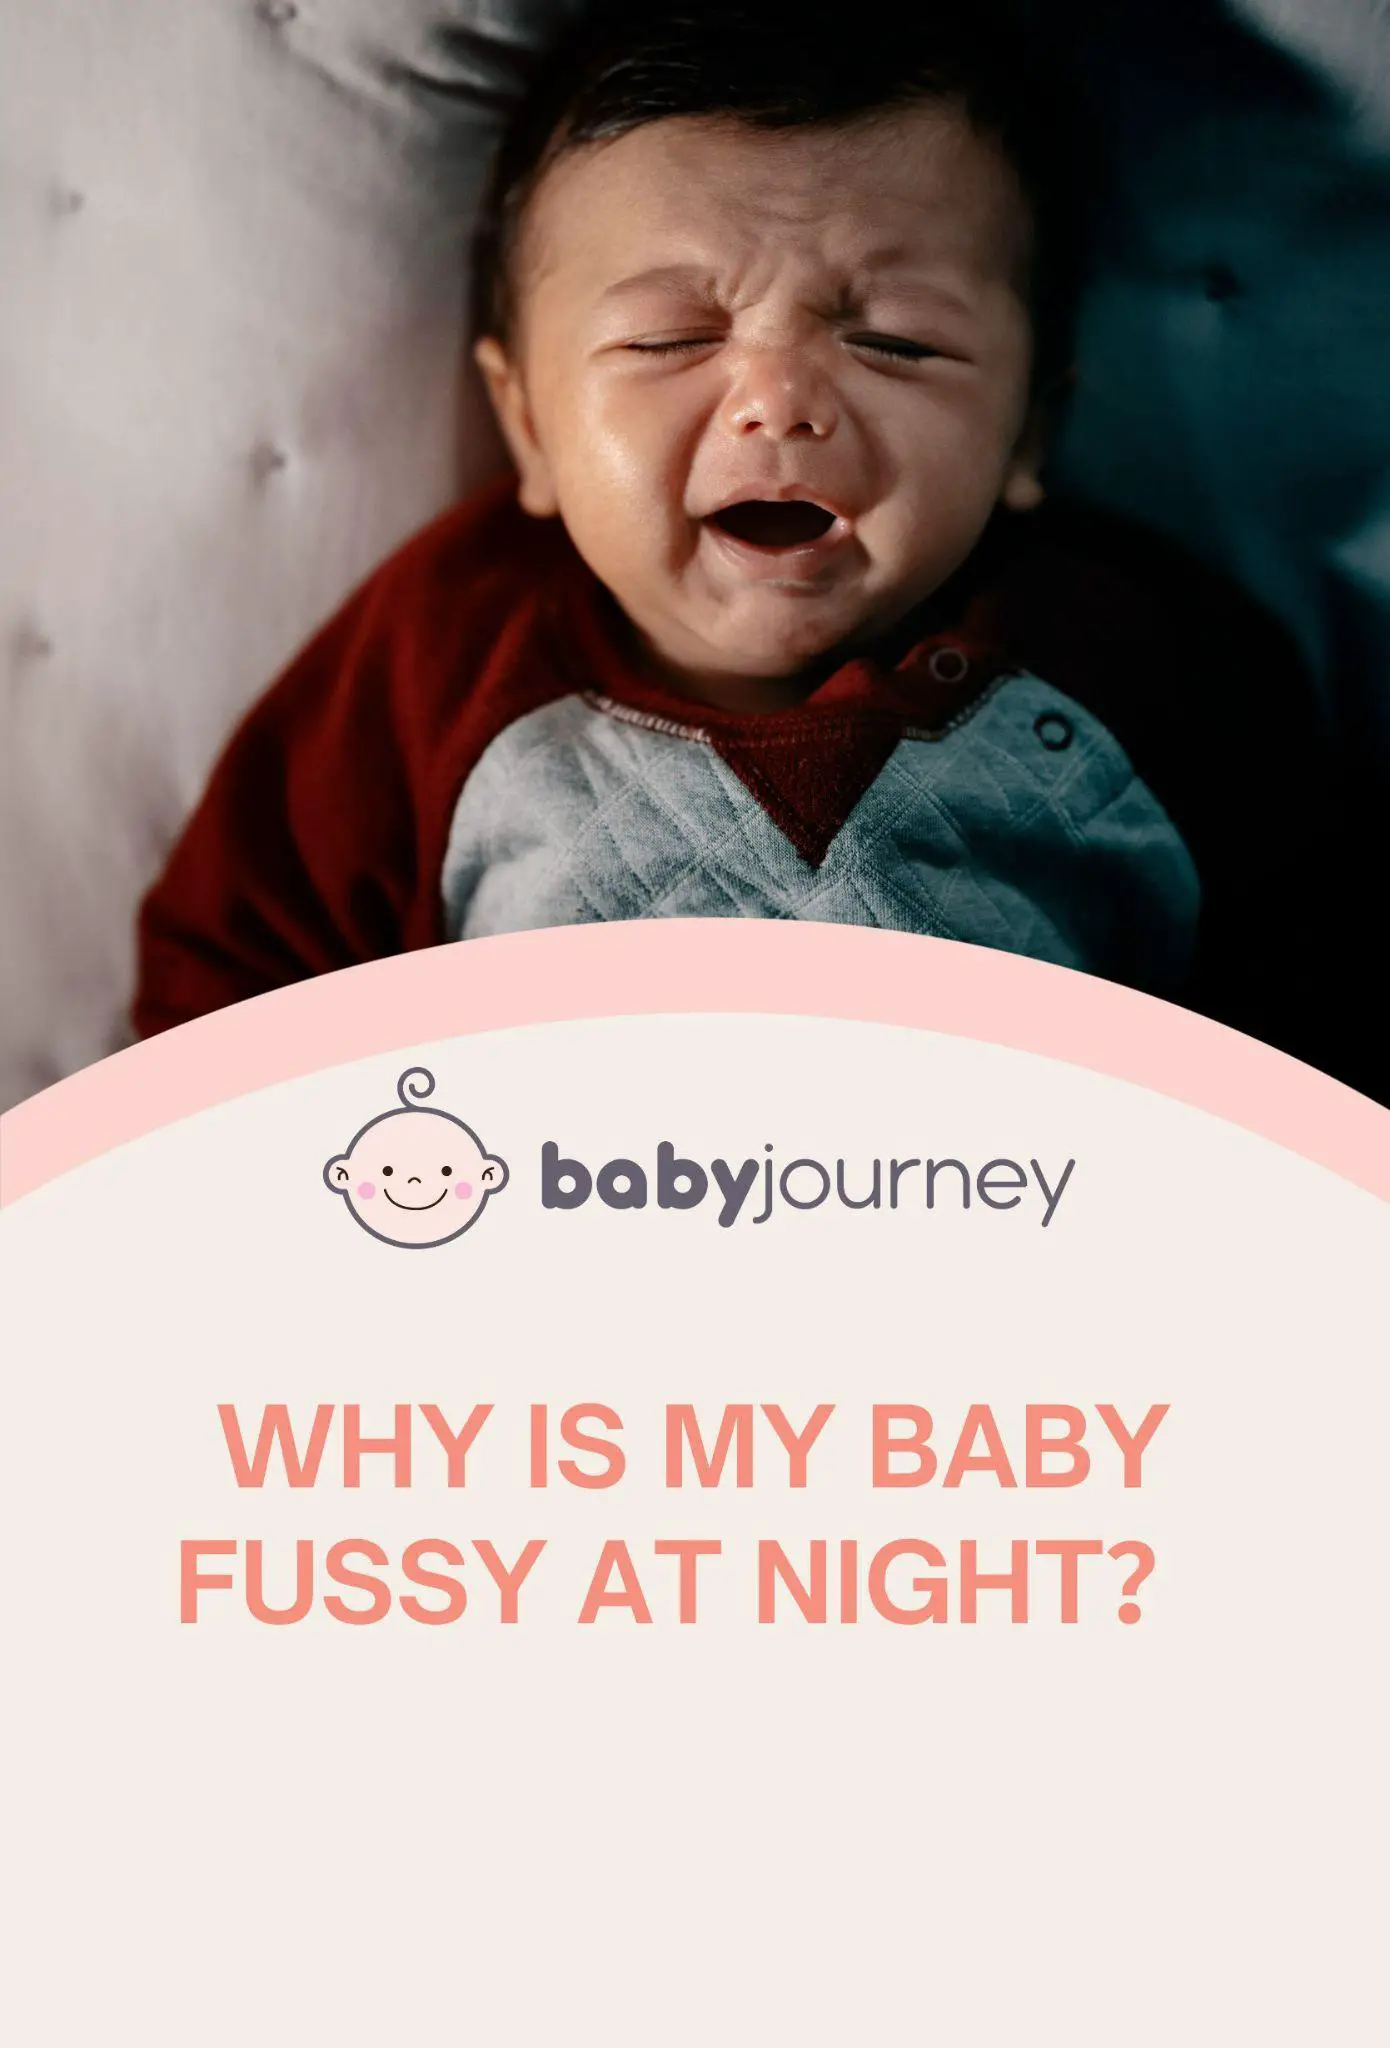 Why Is My Baby Fussy at Night Pinterest - Baby Journey